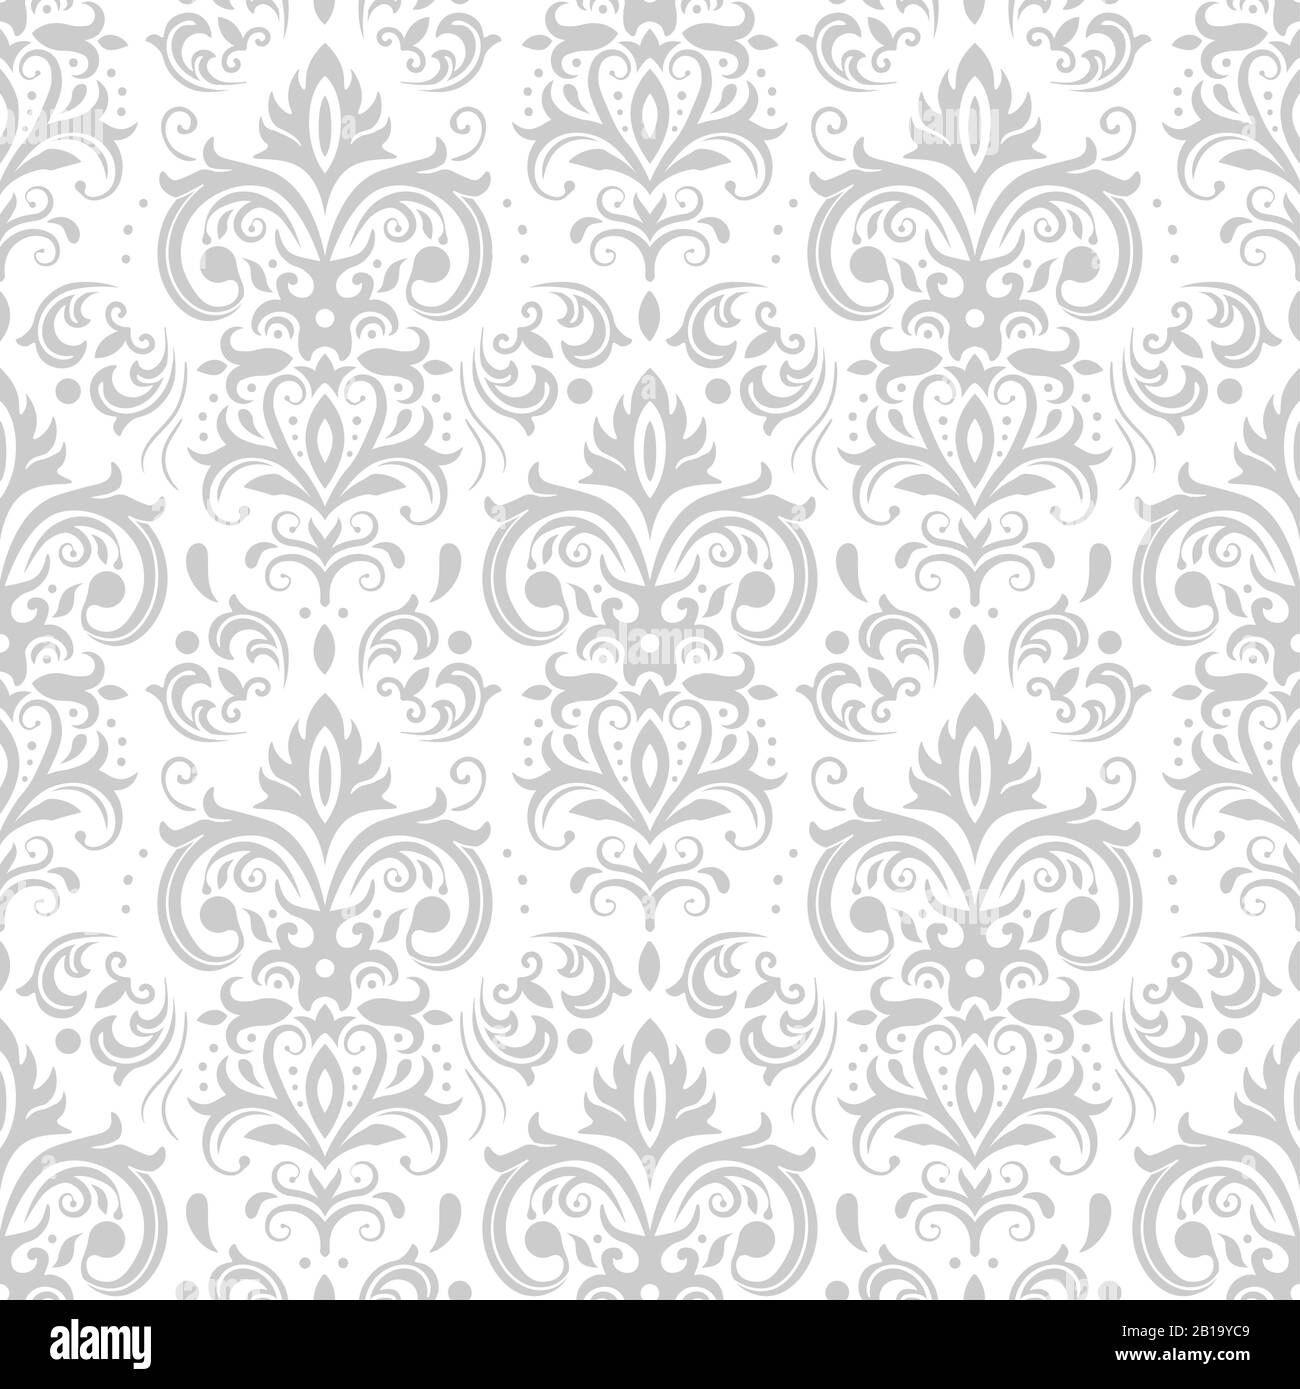 Decorative damask pattern. Vintage ornament, baroque flowers and silver venetian ornate floral ornaments seamless vector background Stock Vector